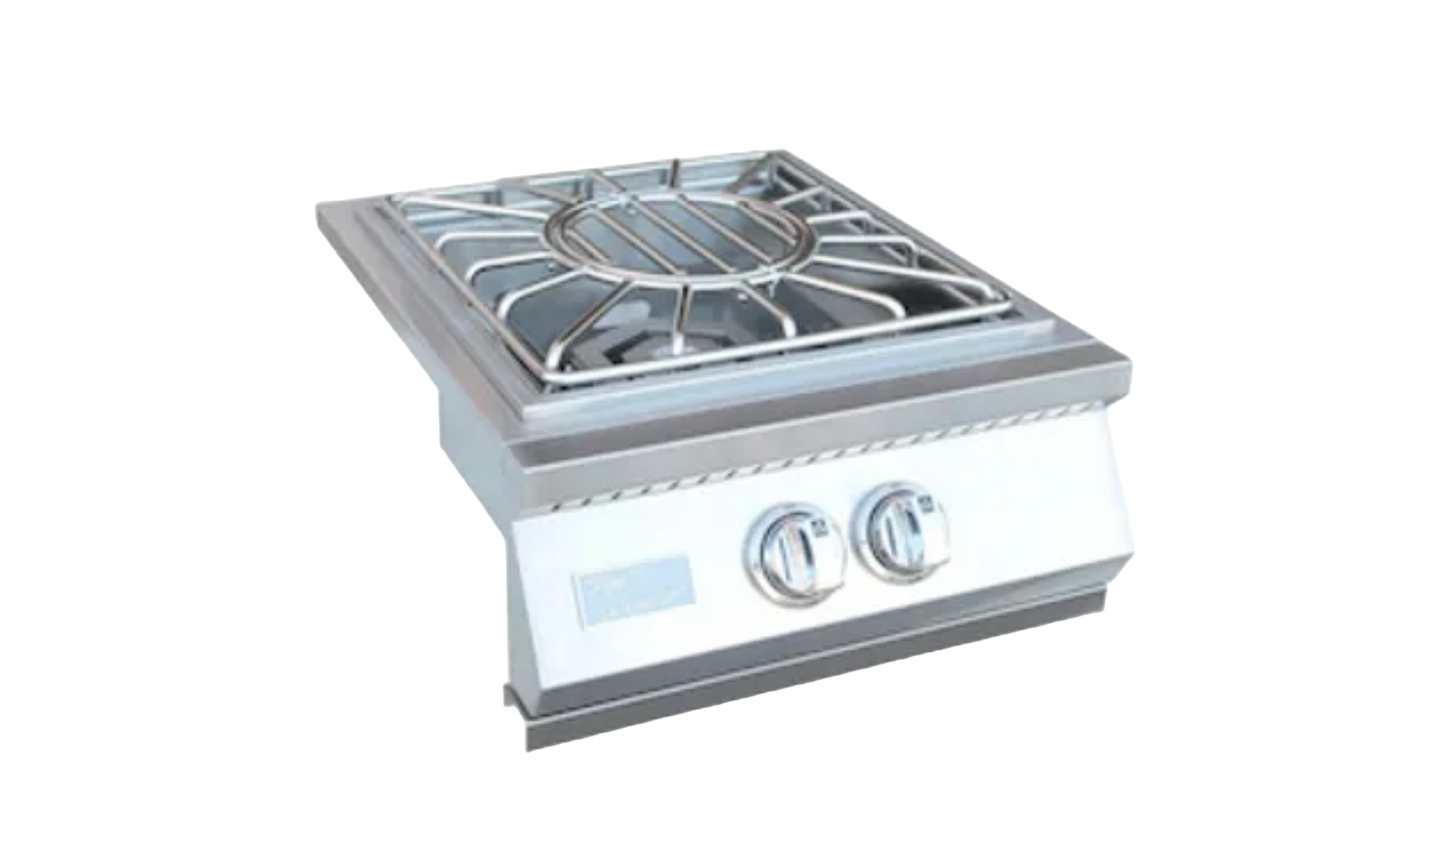 Built-in Power Burner with Removable Grate for Wok